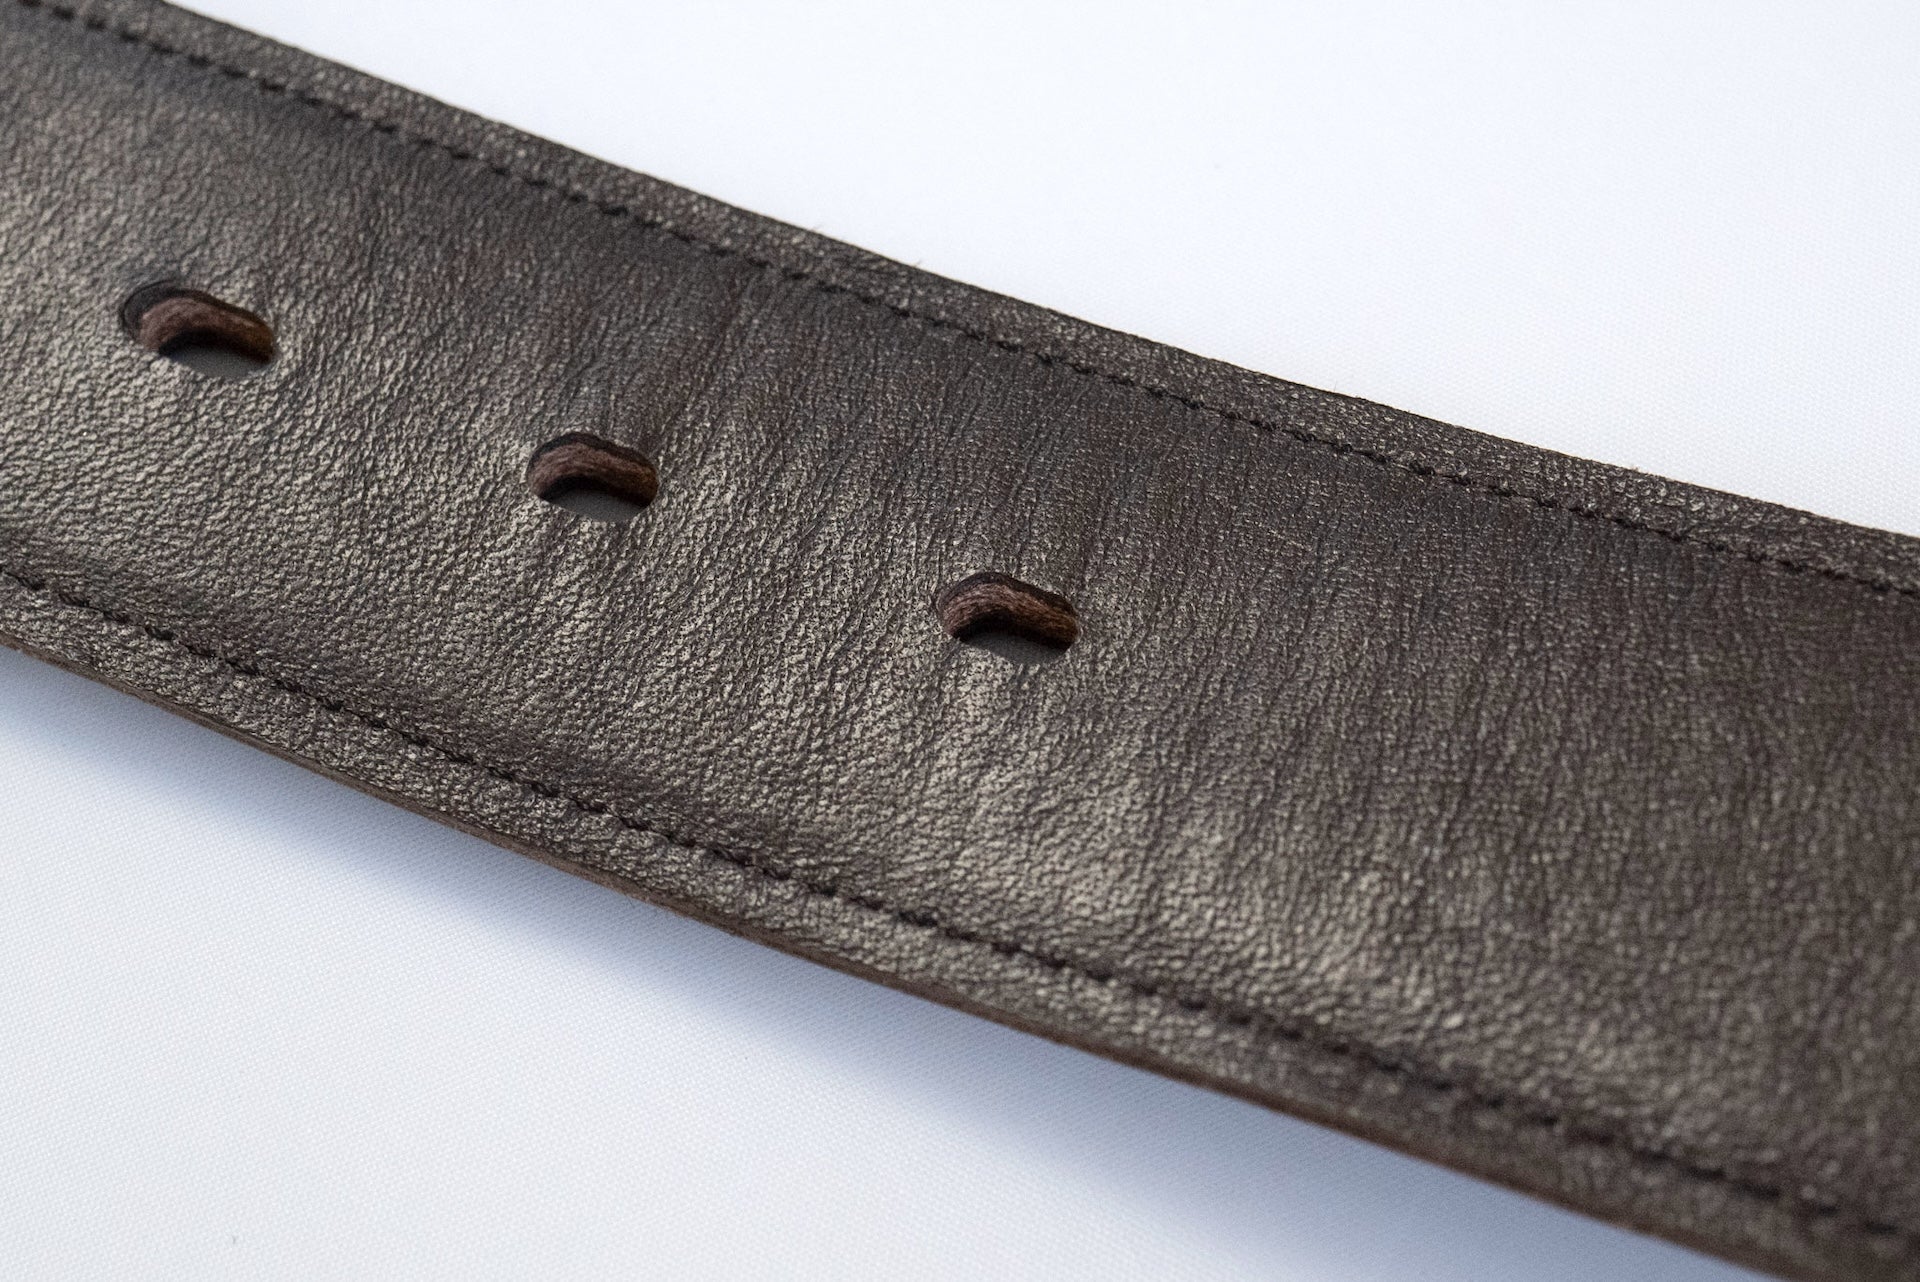 Inception by Accel Company Horsehide "Garrison Belt" (Brown Teacored)